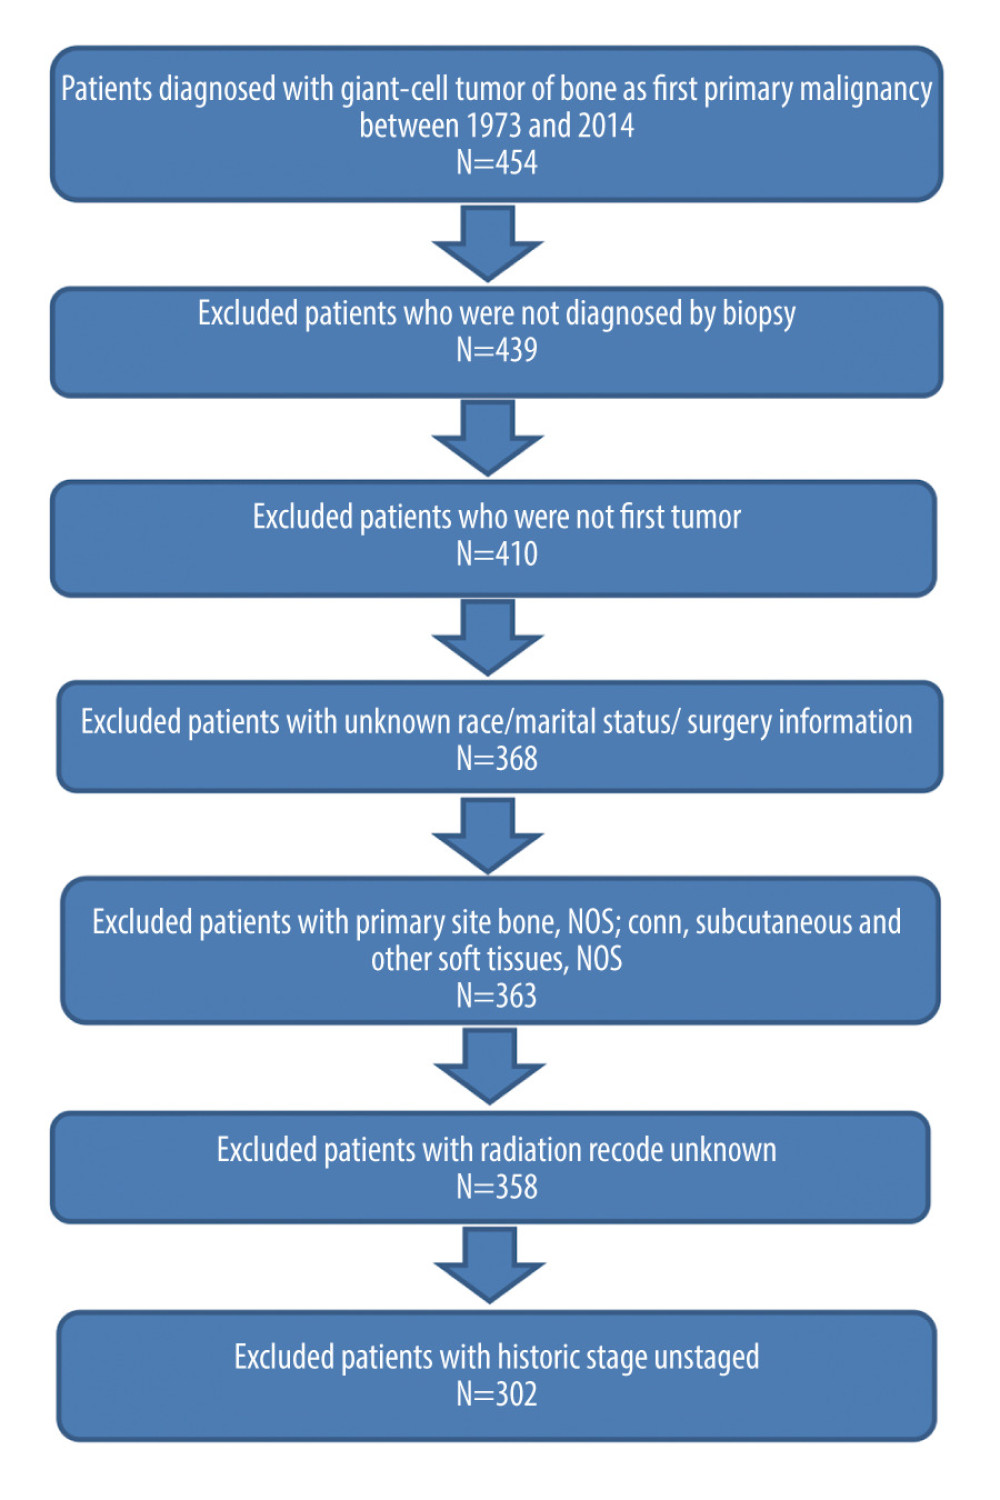 Flow chart showing the patient selection process from the Surveillance, Epidemiology, and End Results database.